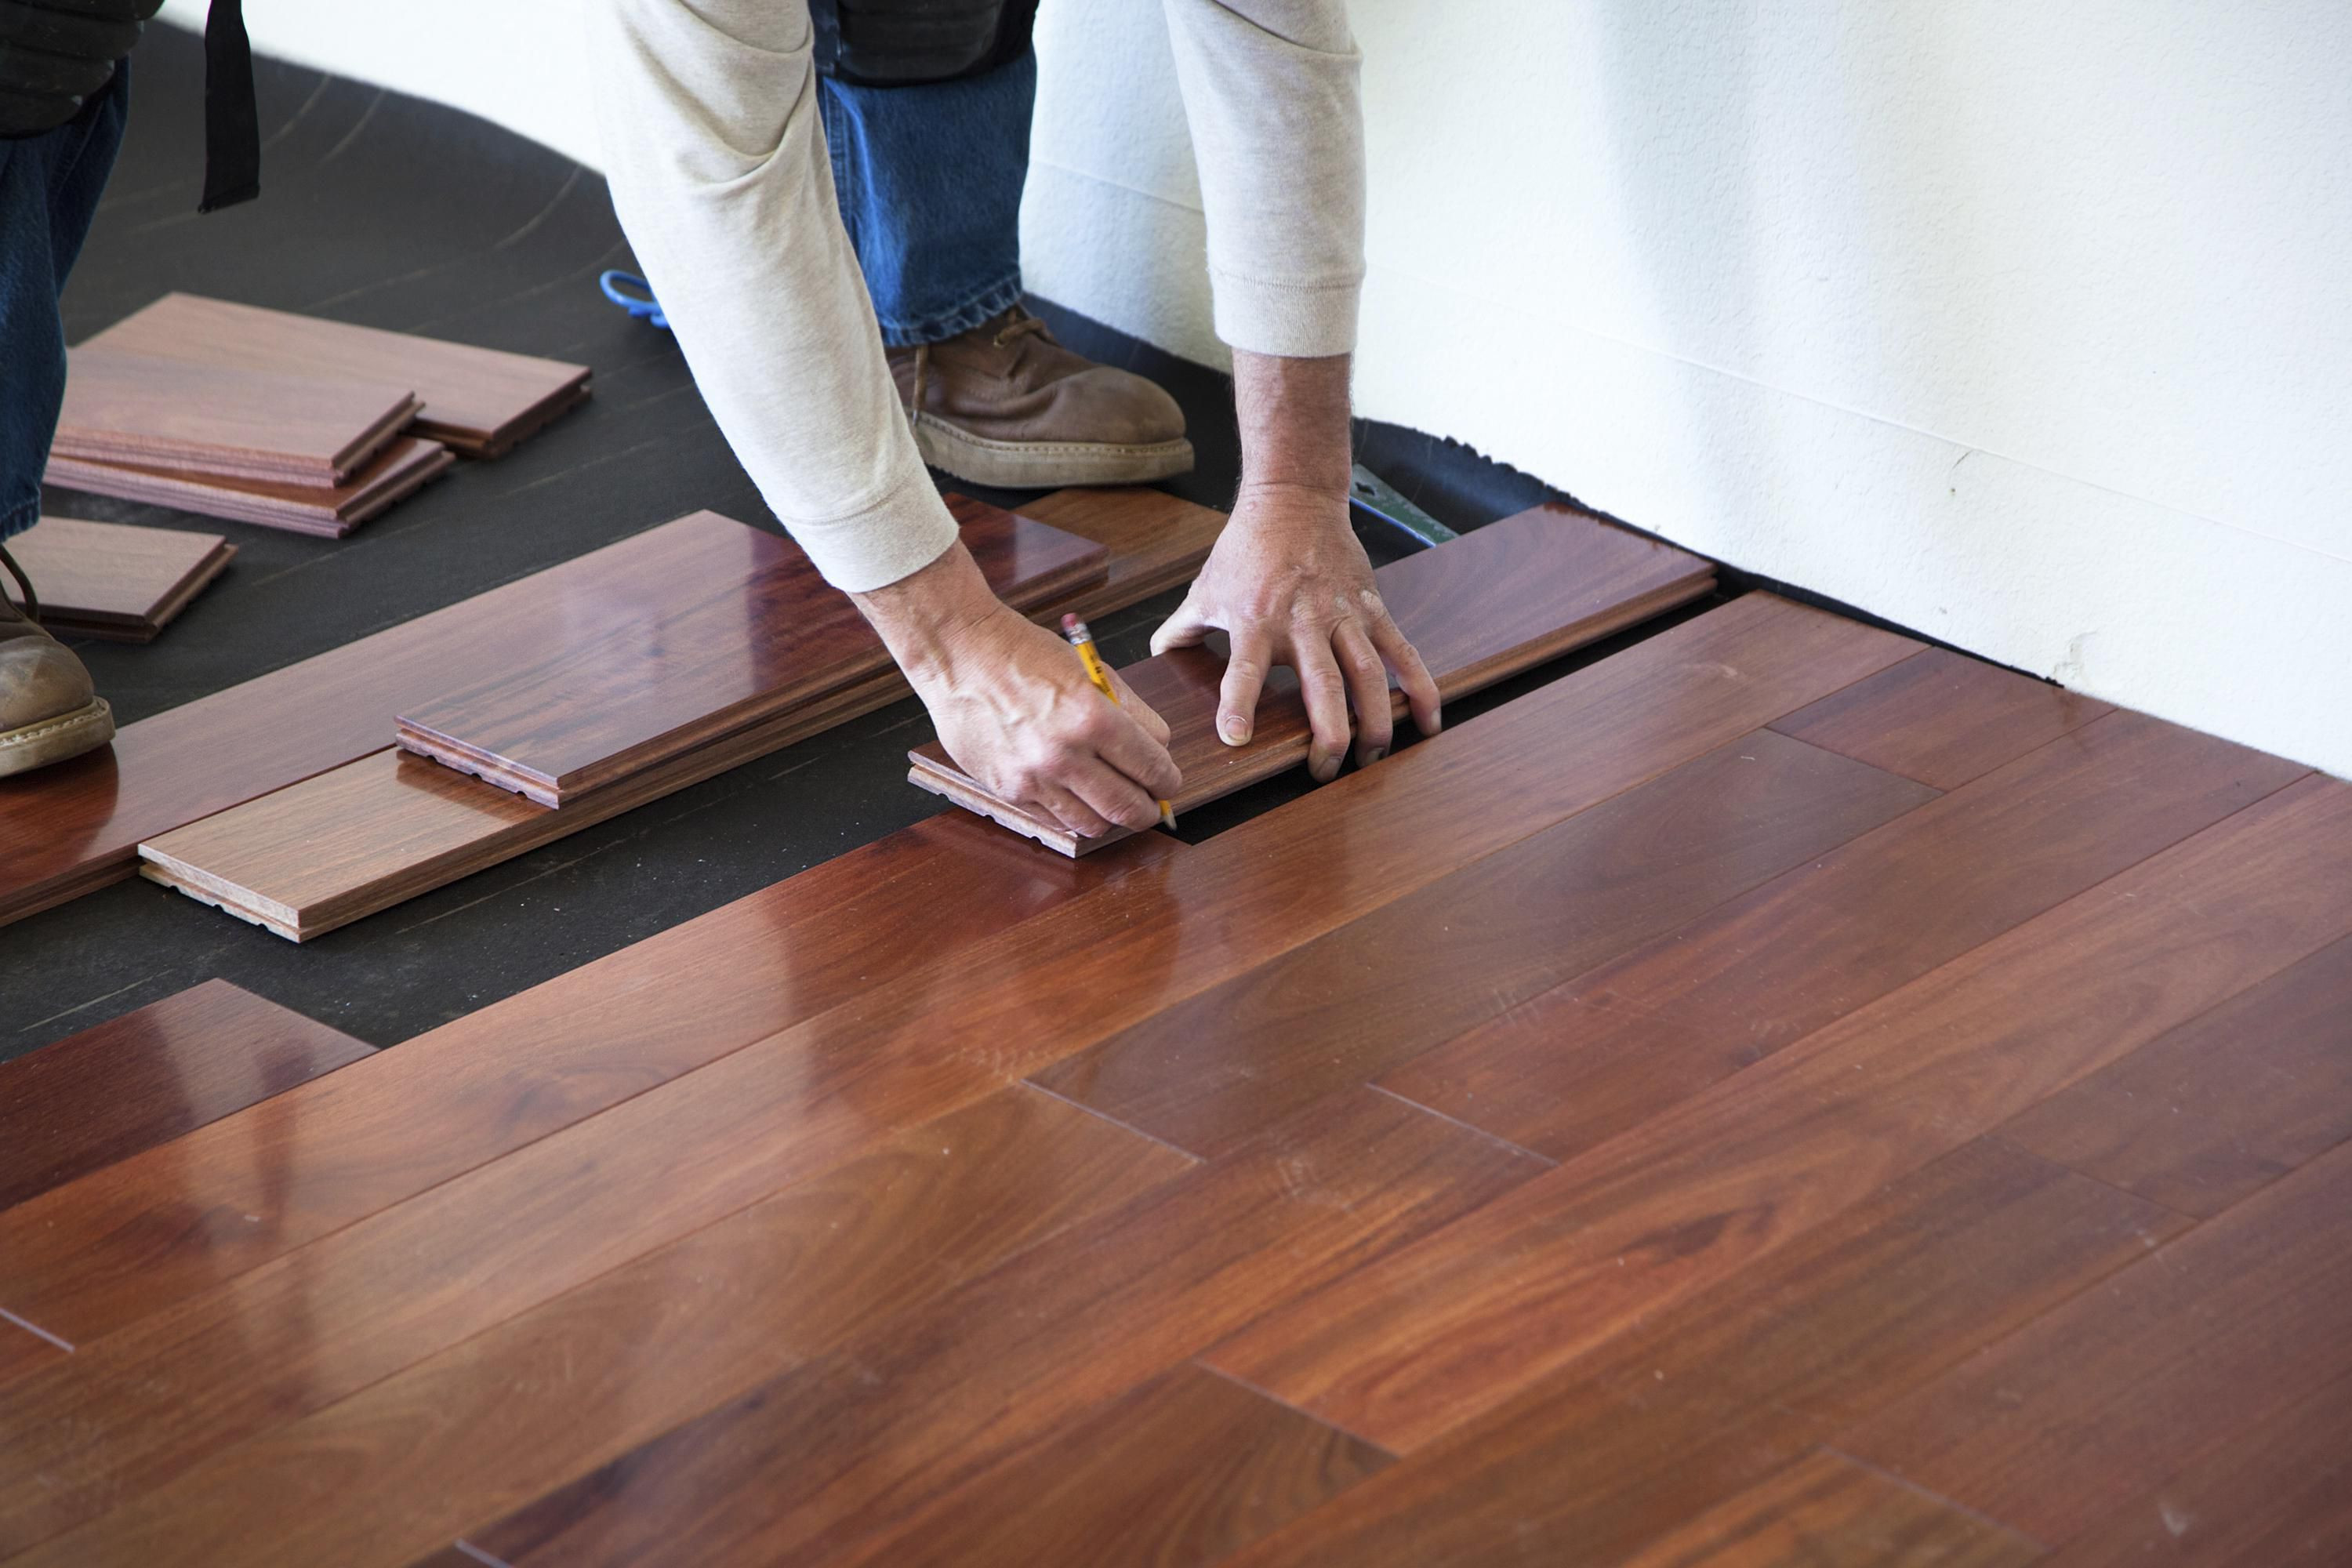 15 Lovable Cost to Refinish Hardwood Floors Per Sq Ft 2022 free download cost to refinish hardwood floors per sq ft of this is how much hardwood flooring to order with regard to 170040982 56a49f213df78cf772834e21